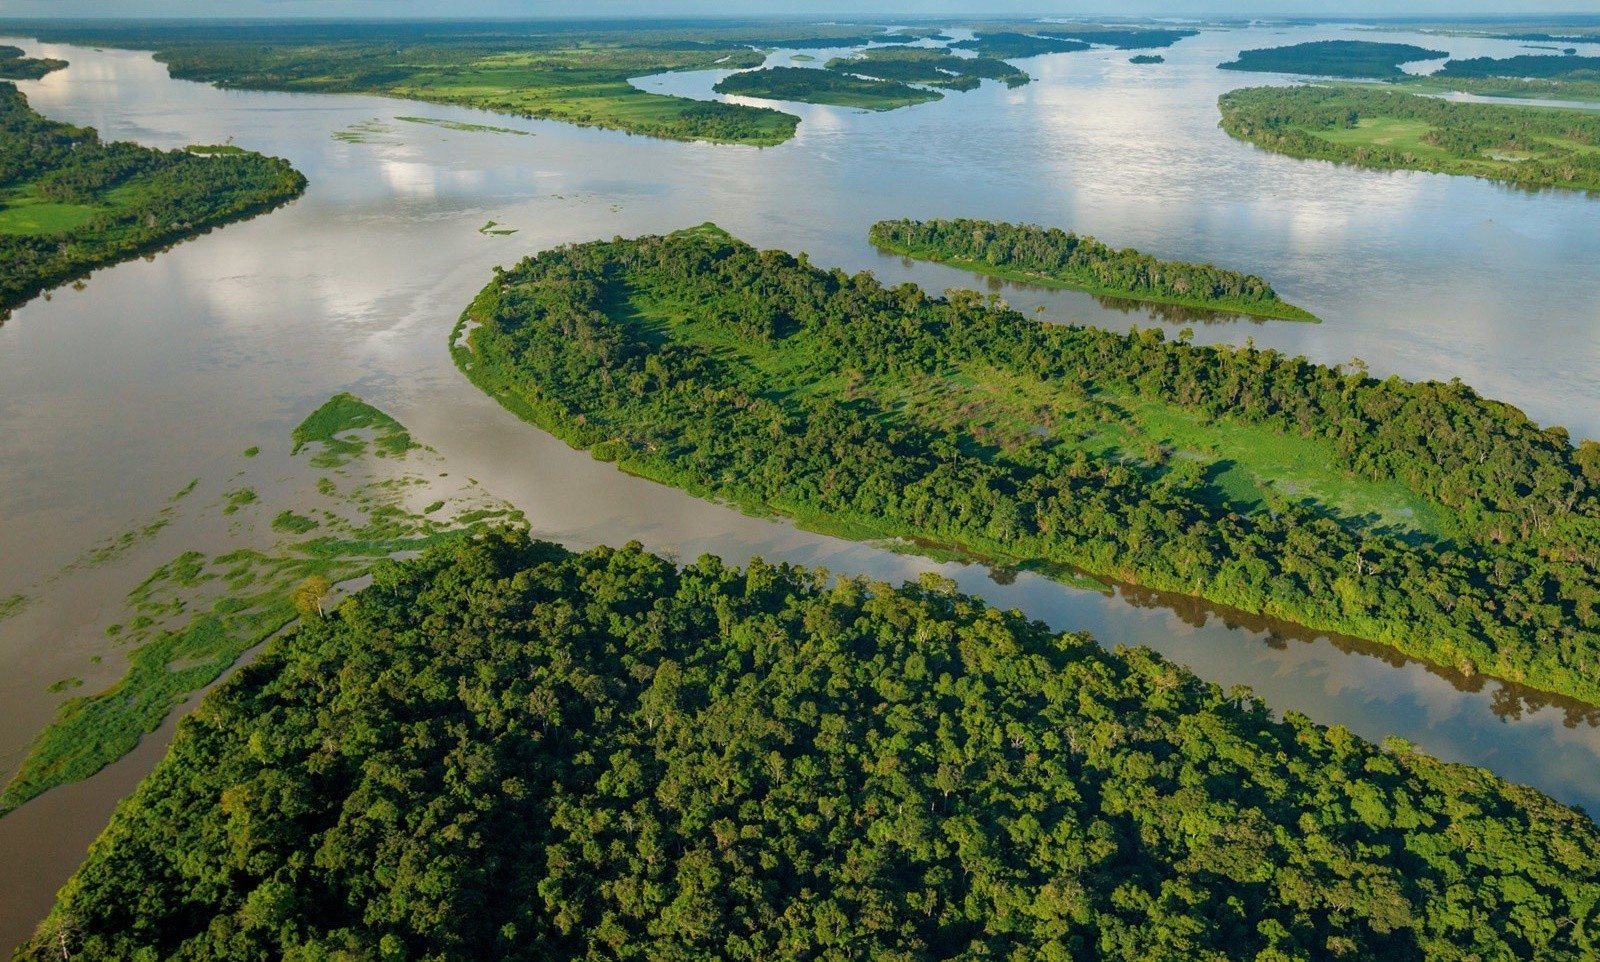 Congo River Absolute Location / What Would Happen If The Mouth Of The